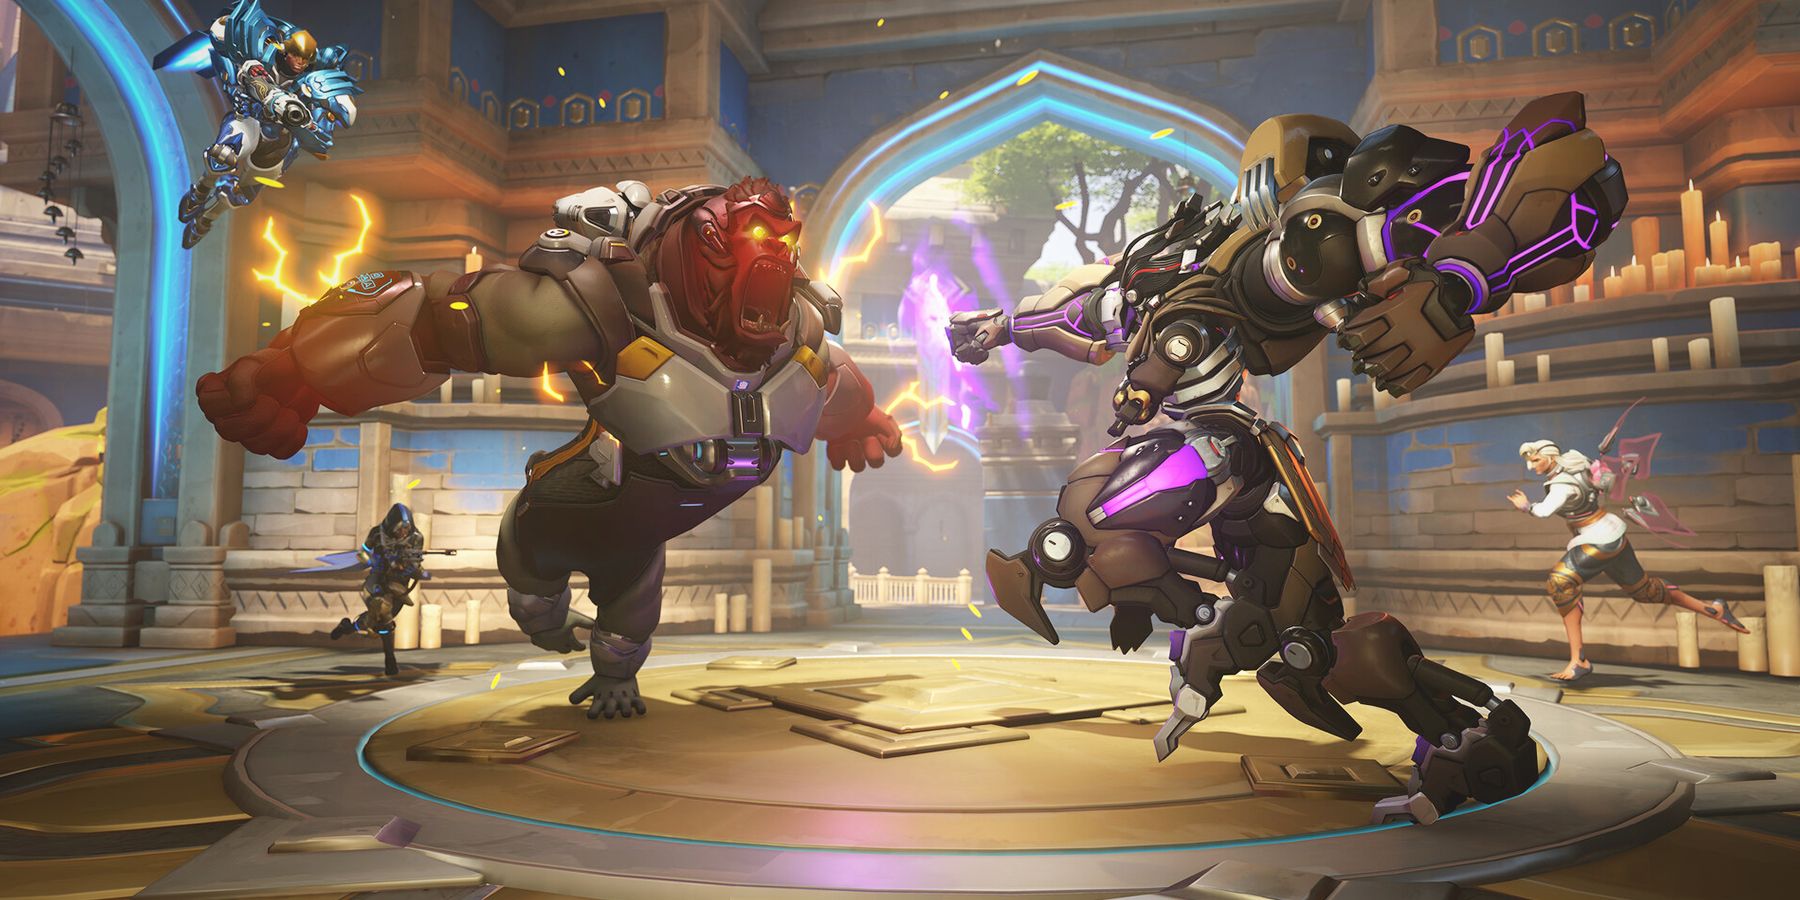 Overwatch 2 is the worst game on Steam, according to user reviews